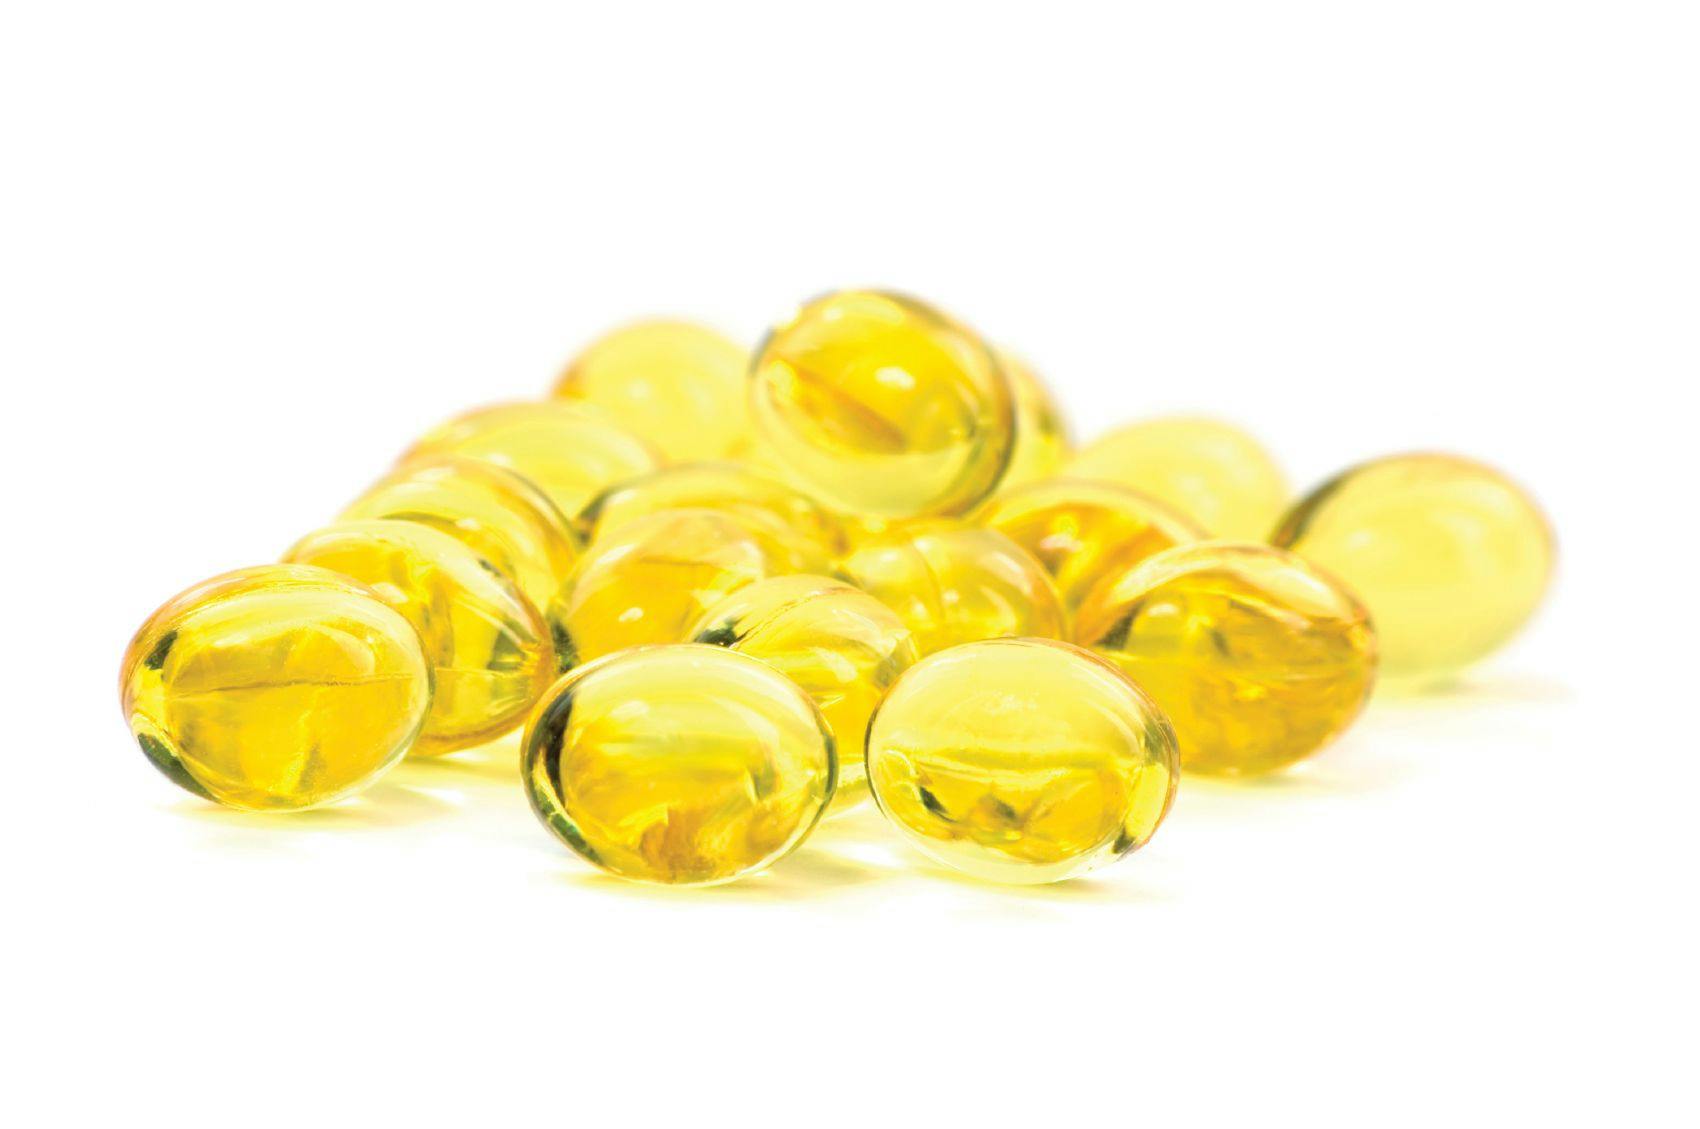 Follow-Up on Omega-3s and Prostate Cancer: Inconclusive